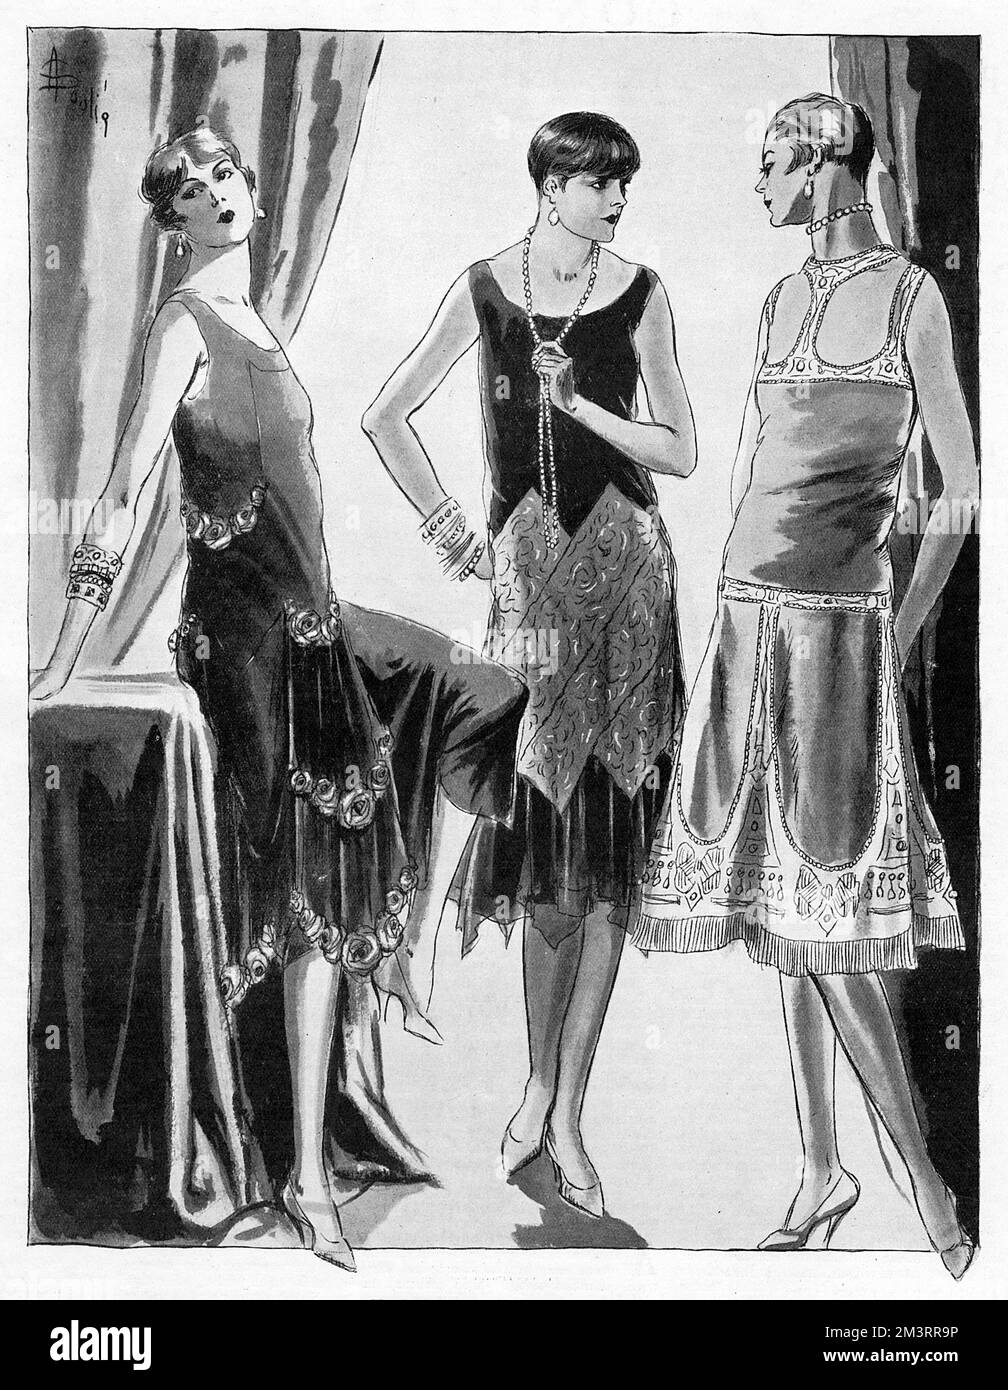 Evening dresses for the fashionable resort of Monte Carlo on the Cote d'Azur.  On the left, crepe dress in peacock blue enriched with silver rose.  Centre - black satin dress with insertions of pearl and gold embroidery.  On the right, rose coloured velvet and silver tissue encrusted with pearls and mother of pearl.       Date: 1925 Stock Photo